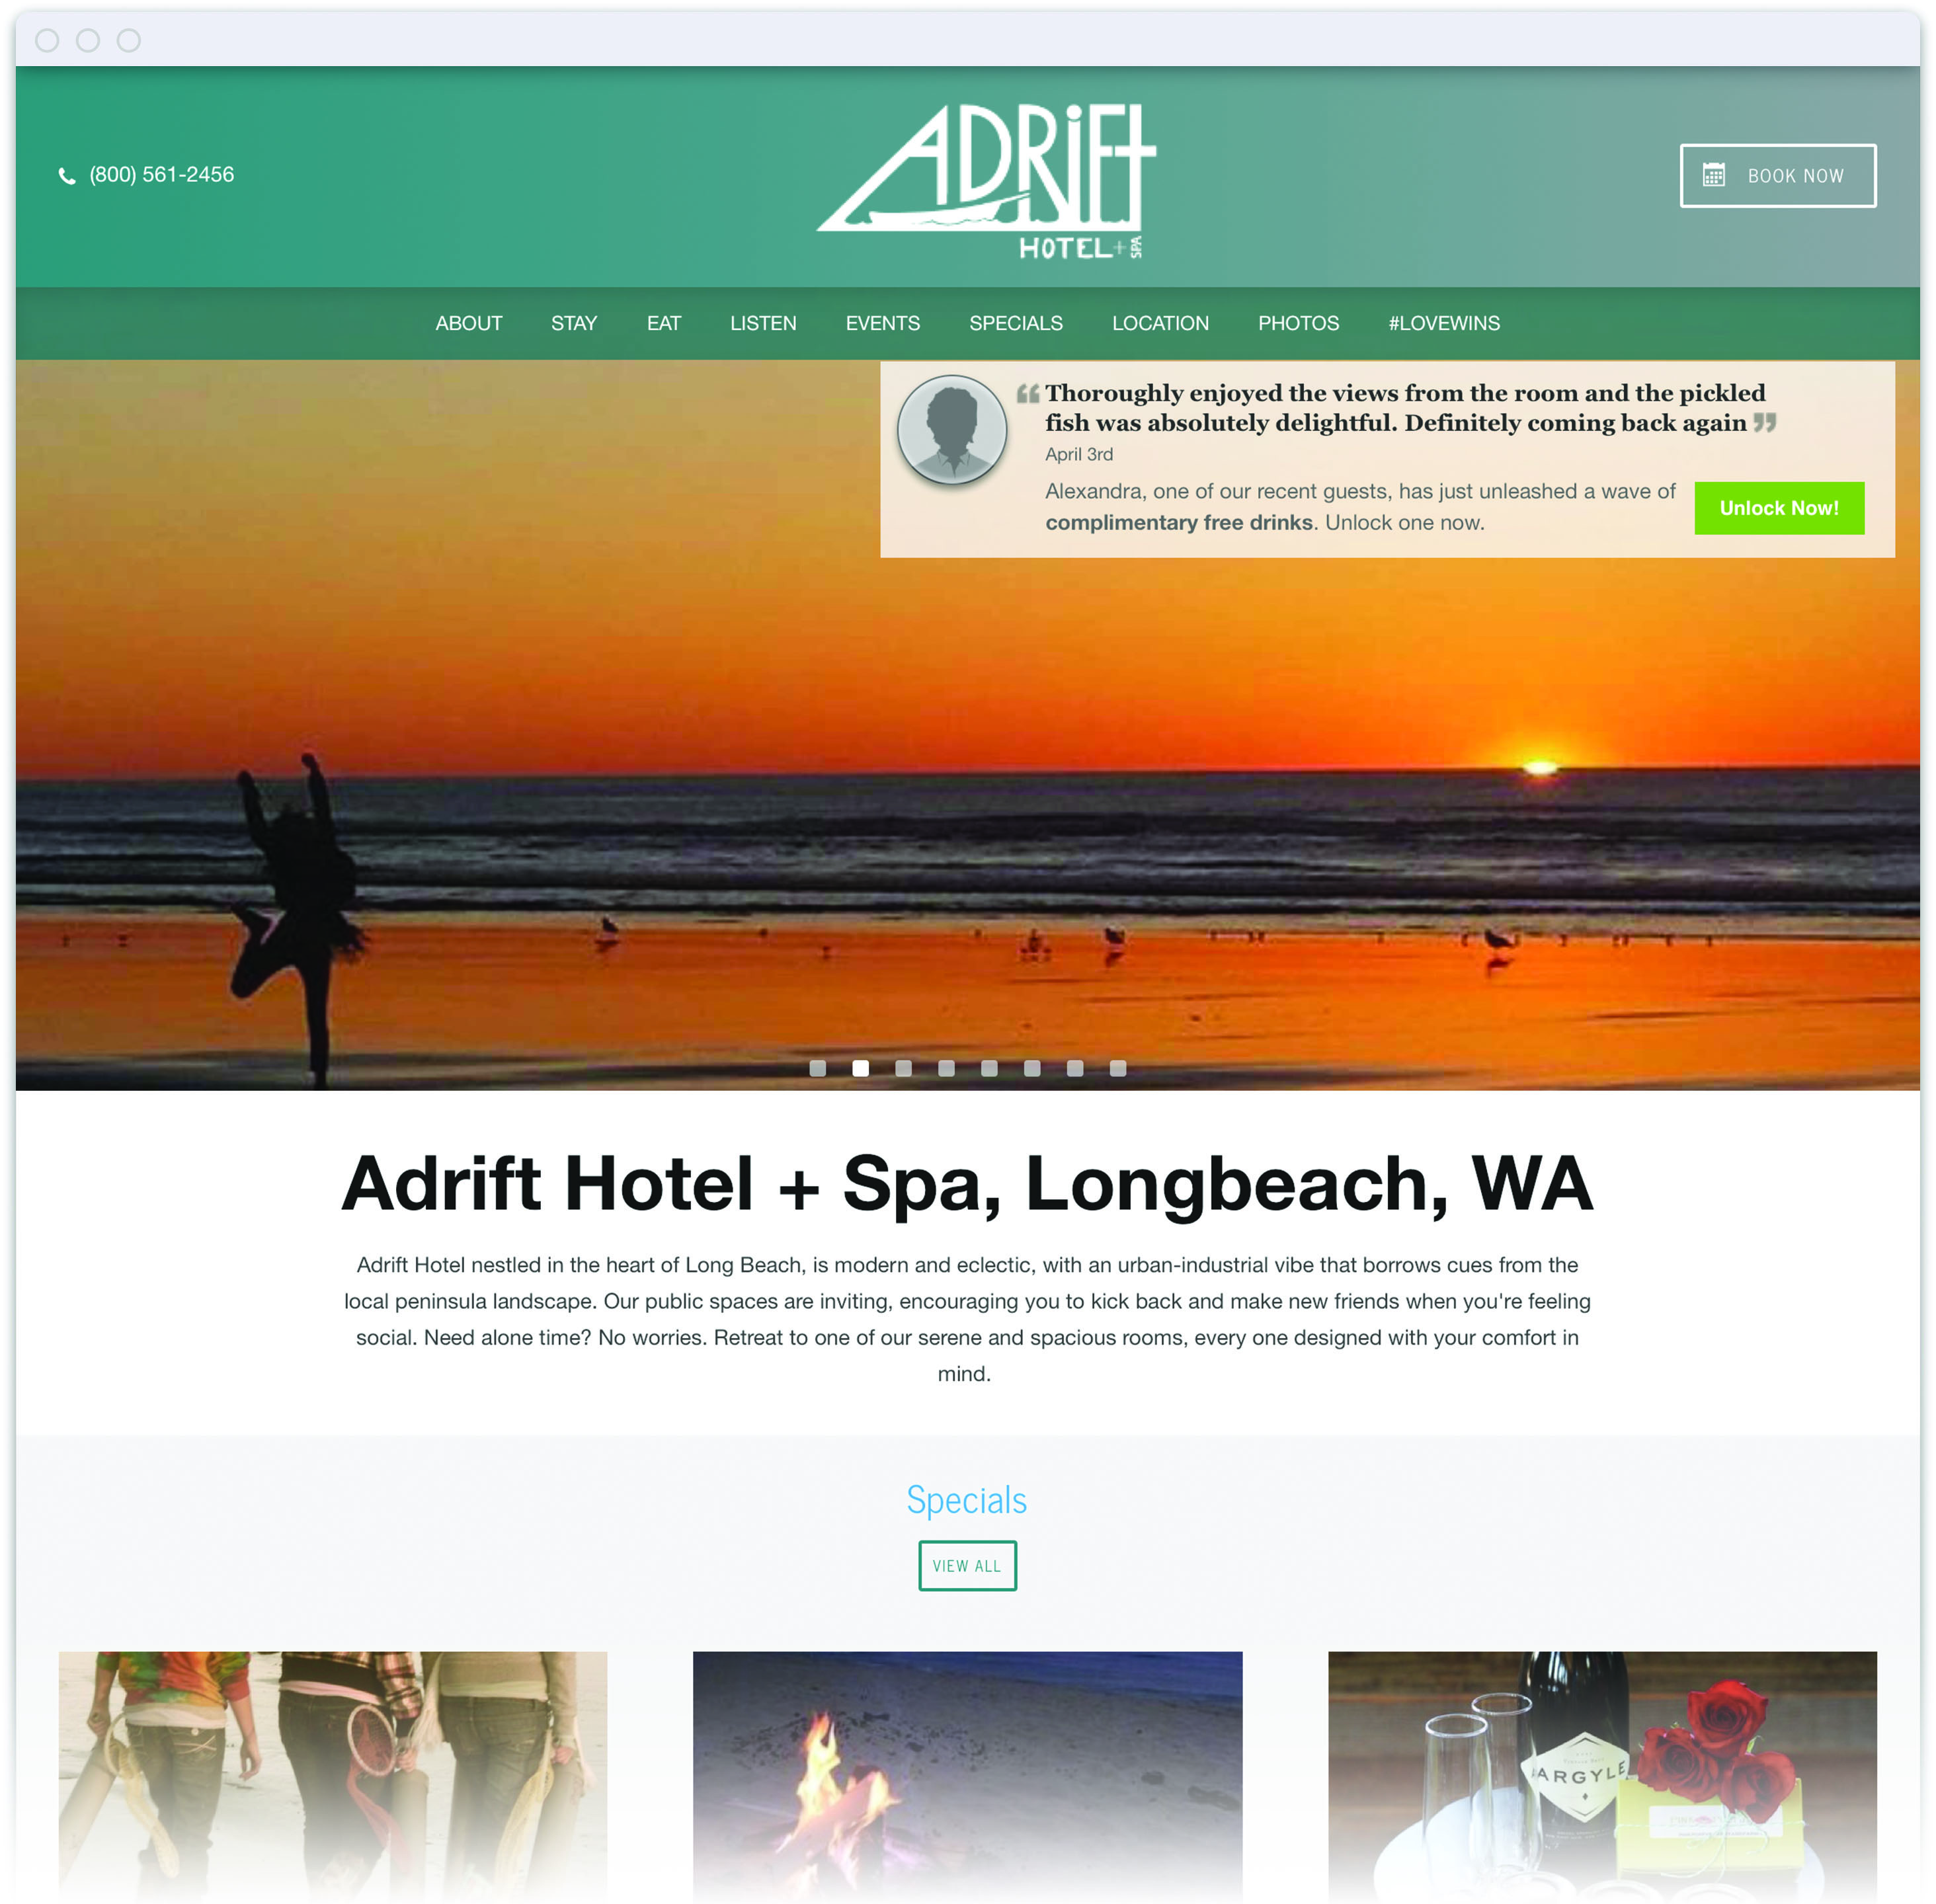 Content provided by guests is used in Adrift Hotel’s digital marketing initiatives, including their website.